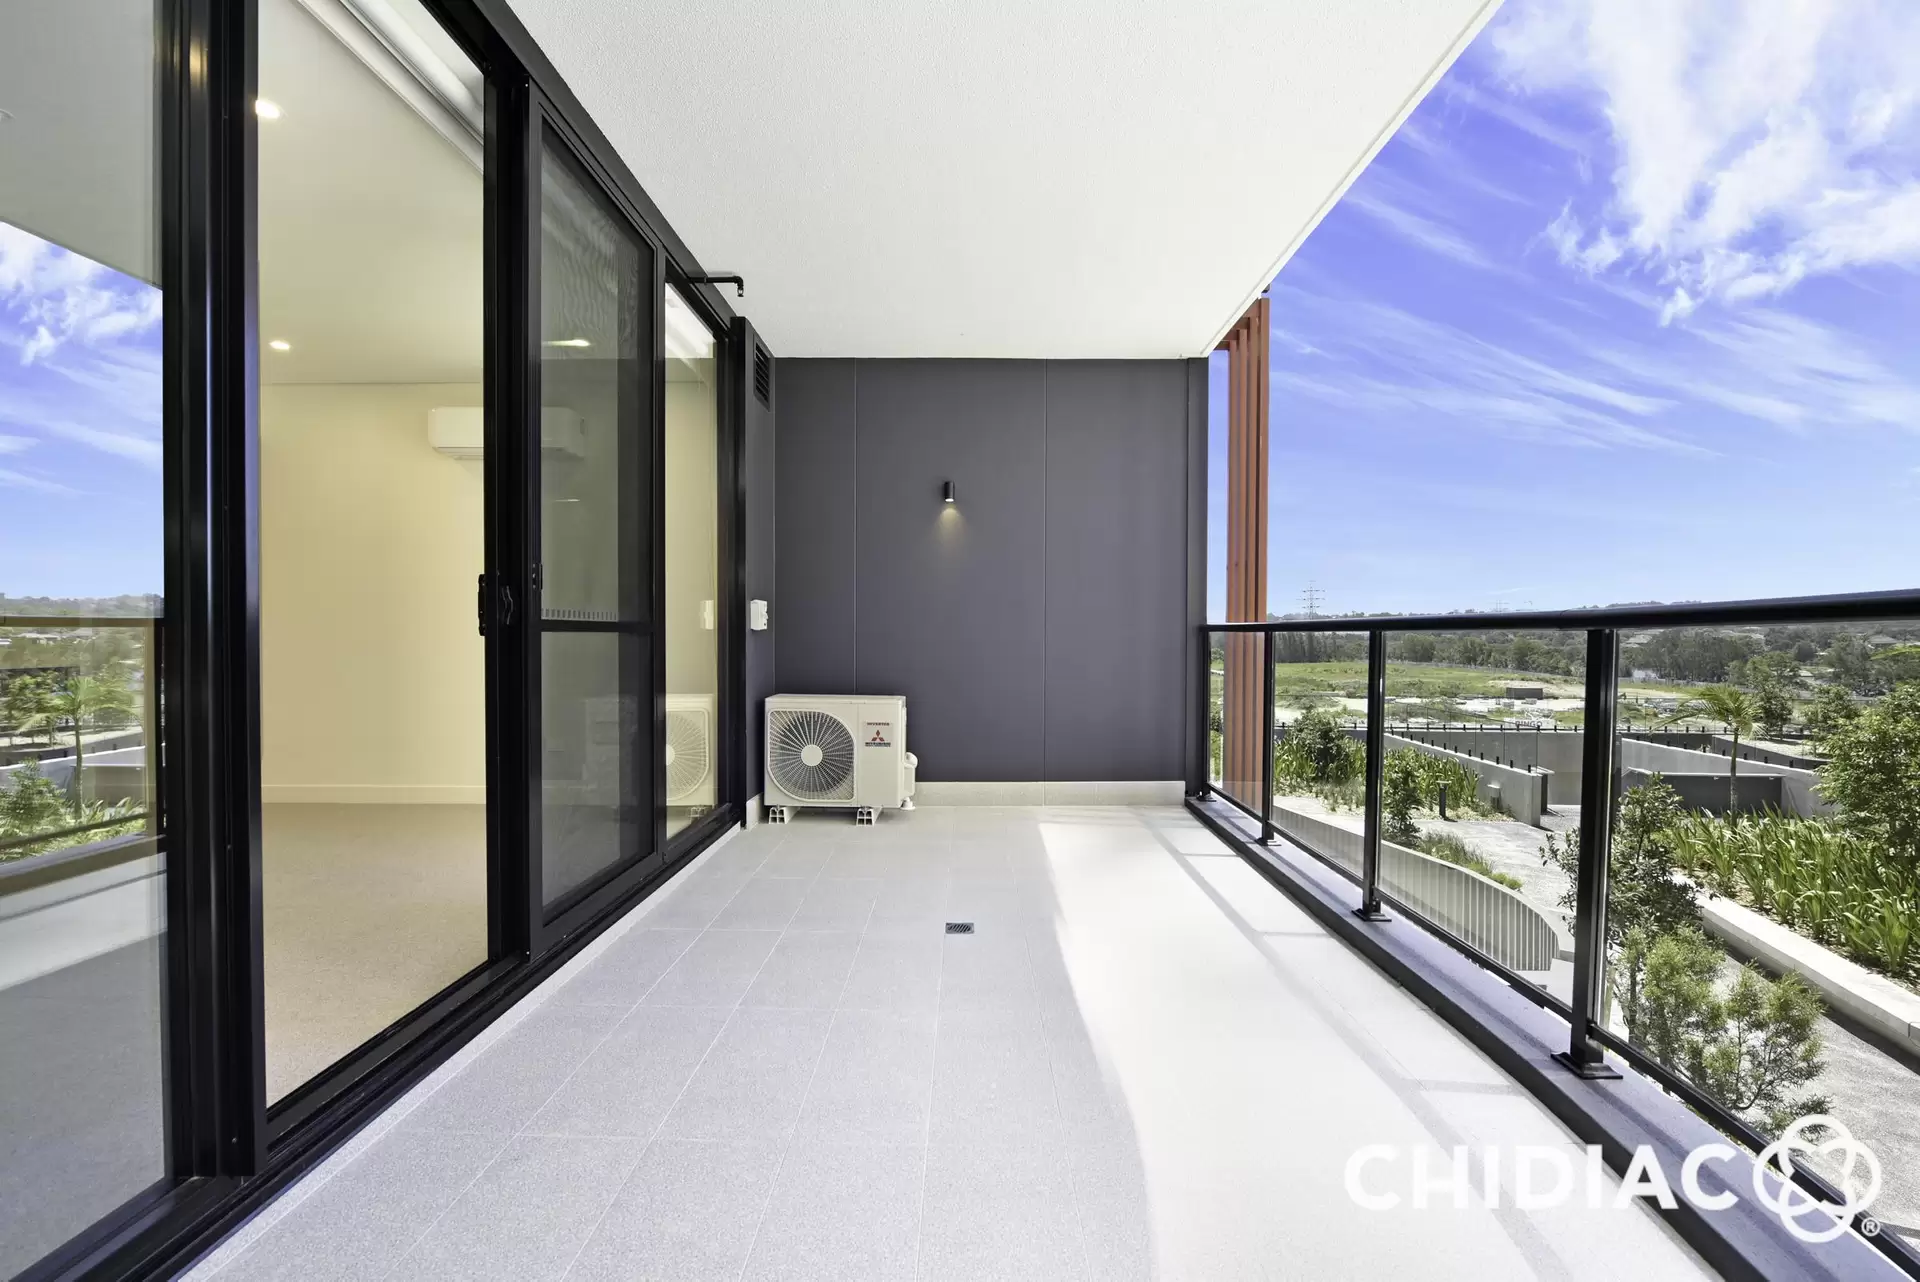 D536/2 Wattlebird Road, Wentworth Point Leased by Chidiac Realty - image 1